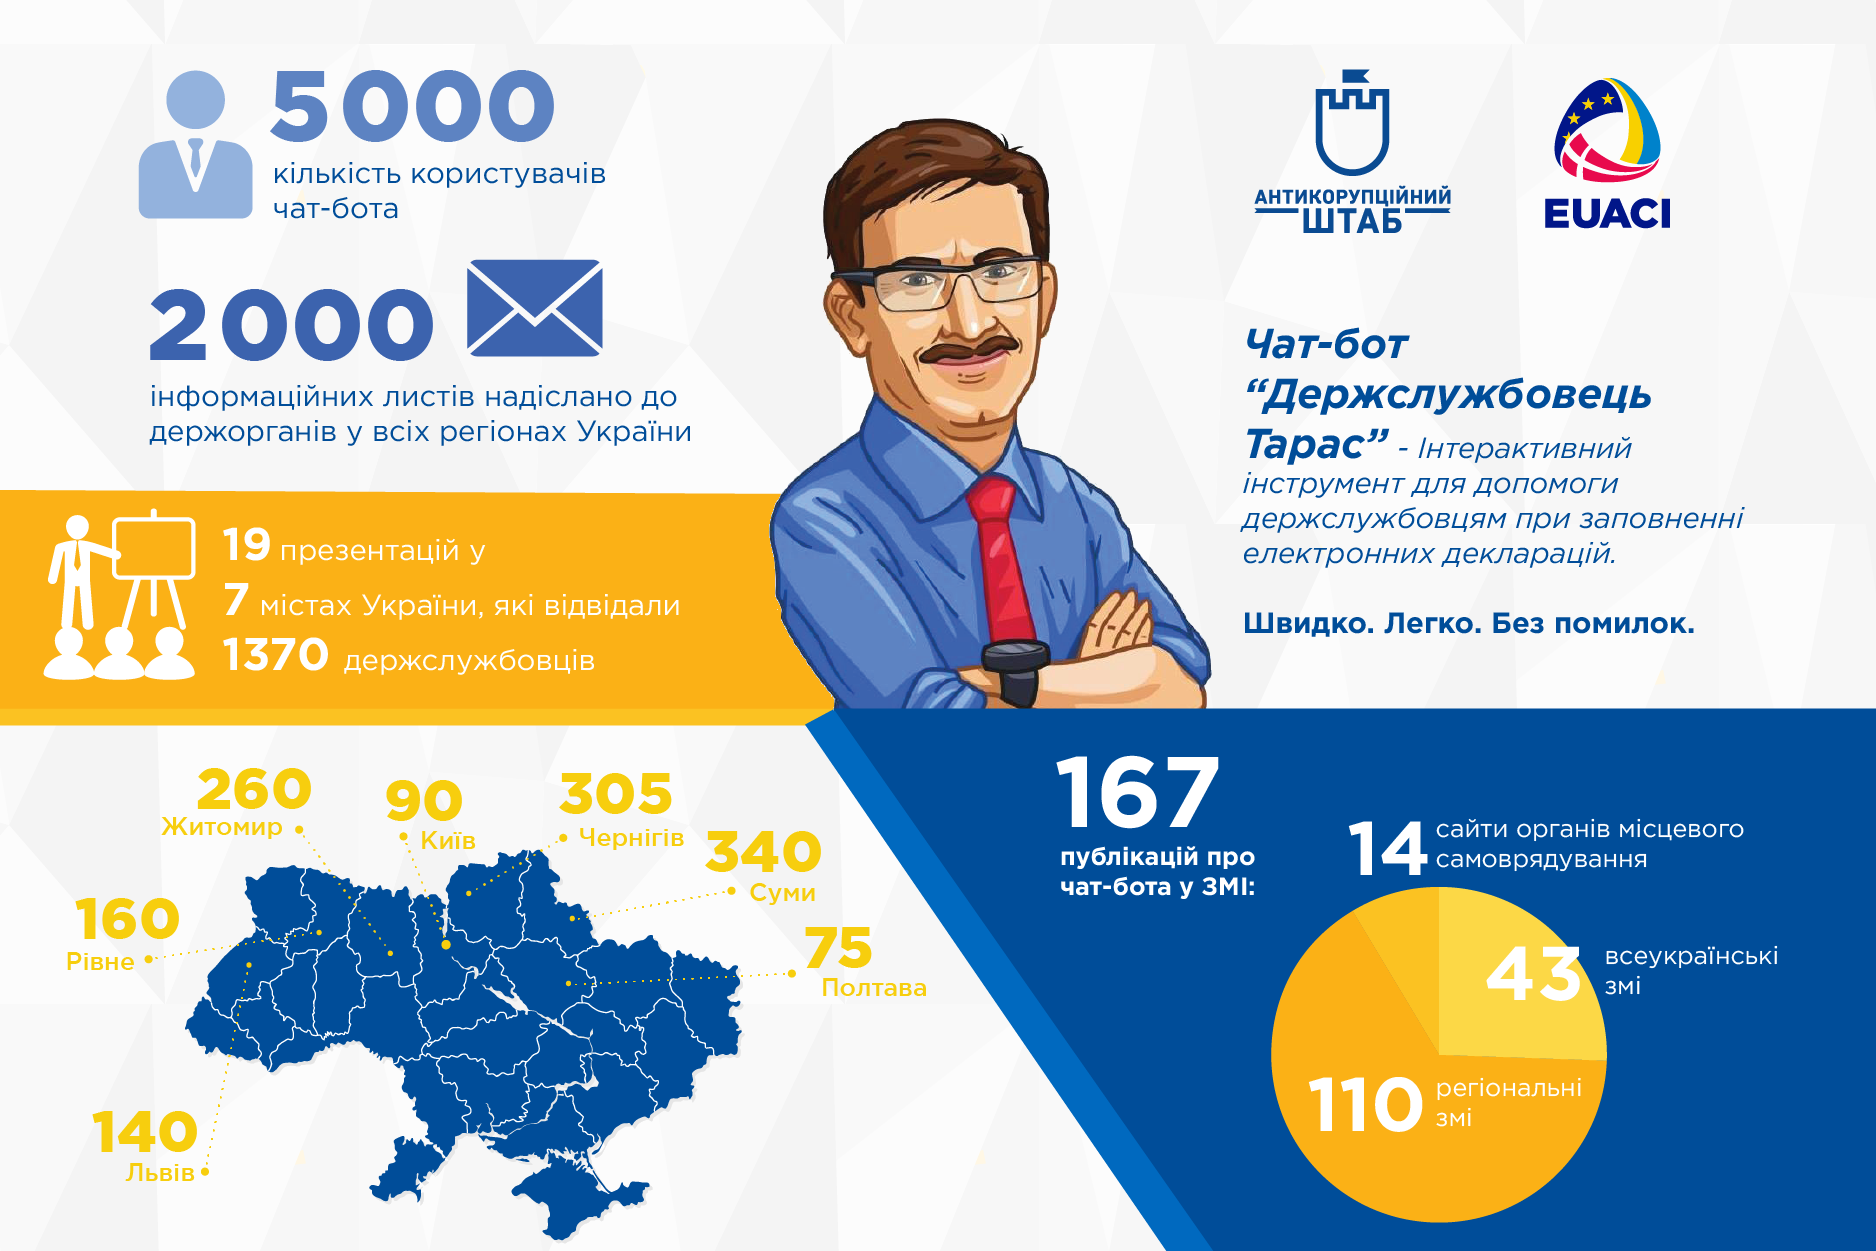 5 thousand Ukrainians used services of the Chatbot 